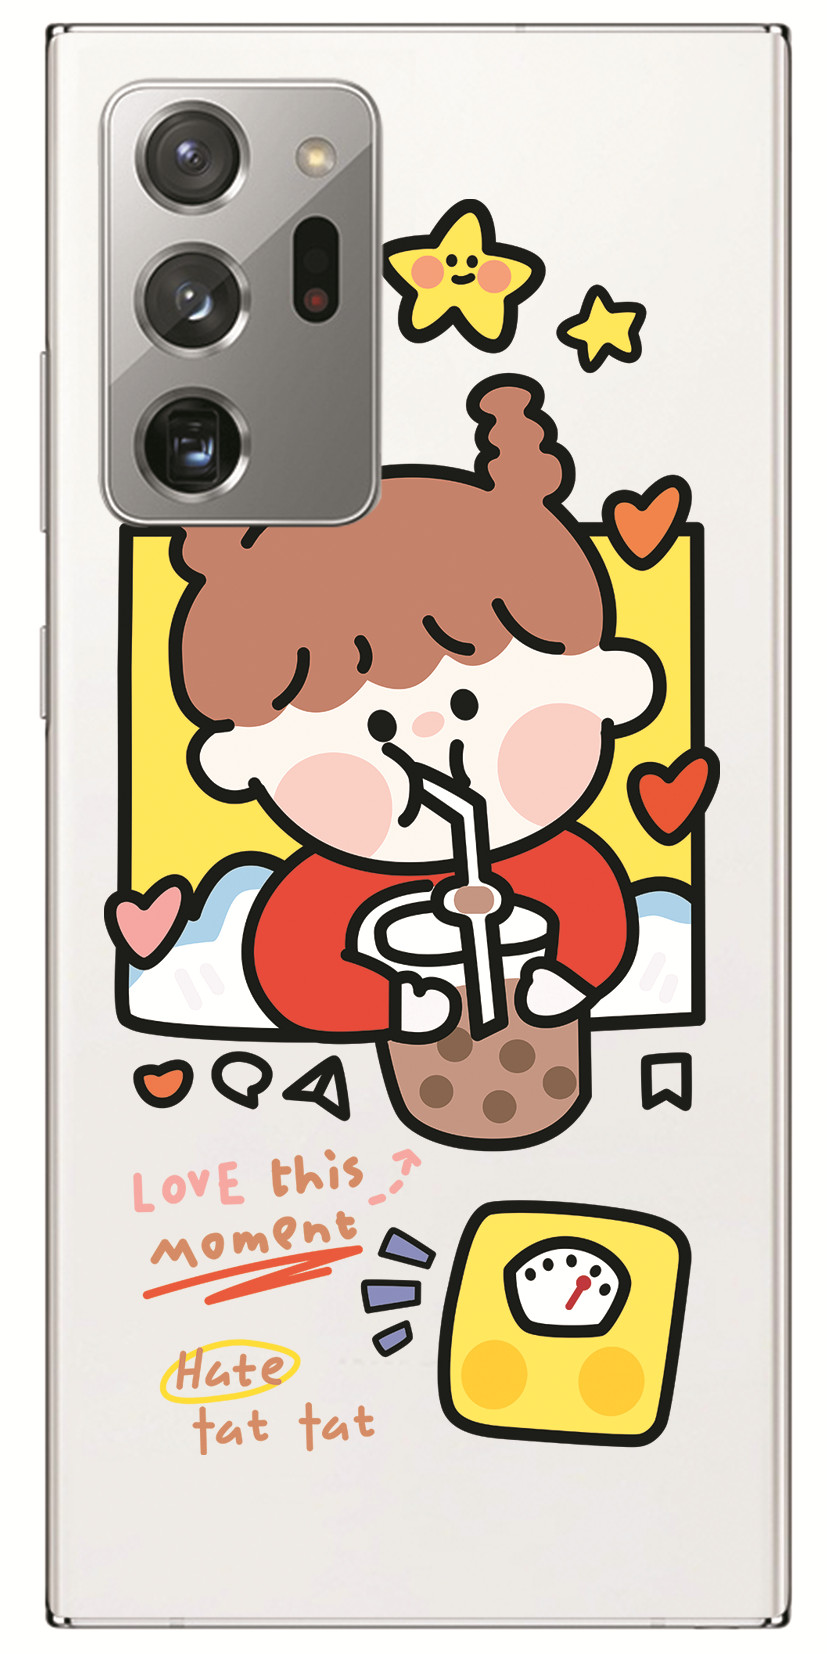 Samsung Galaxy Note 20 Ultra 5G/Note 8 9 10+ Pro INS Cute Cartoon Work hard Brown bear Clear Soft Silicone TPU Phone Casing Lovely label Graffiti Case Back Cover Couple